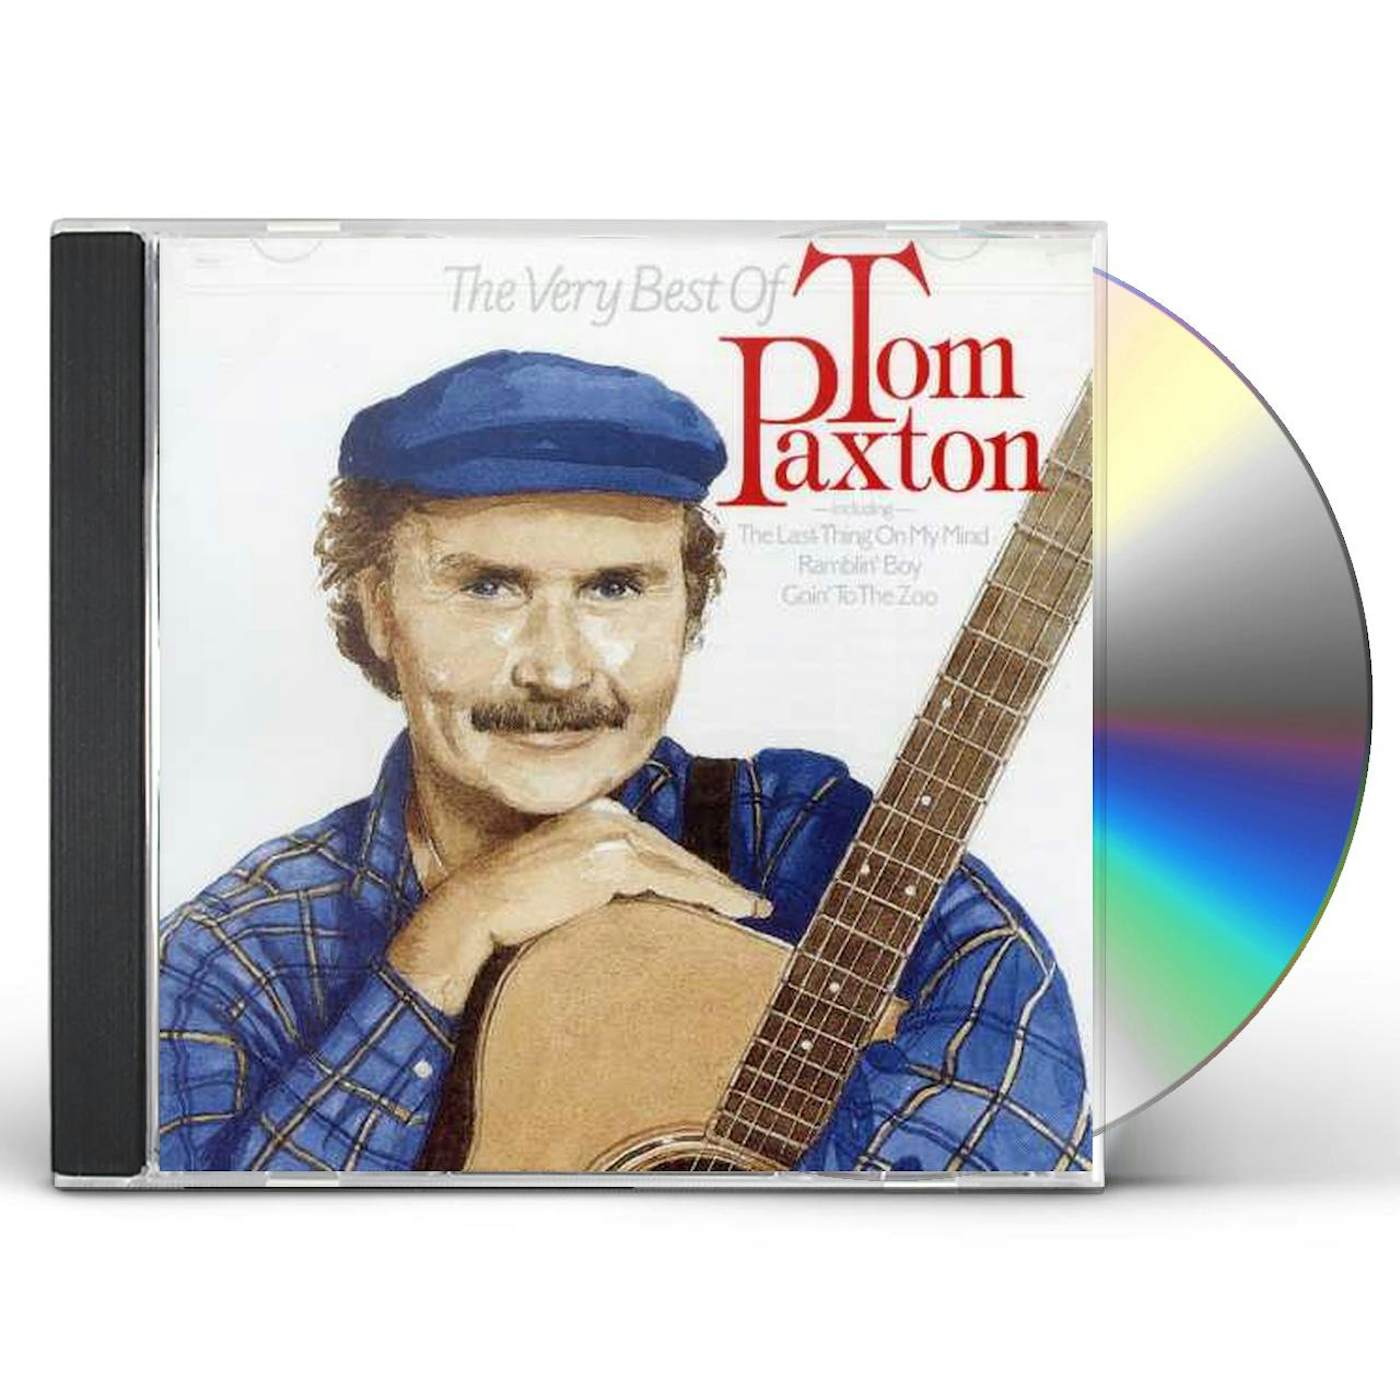 VERY BEST OF TOM PAXTON CD